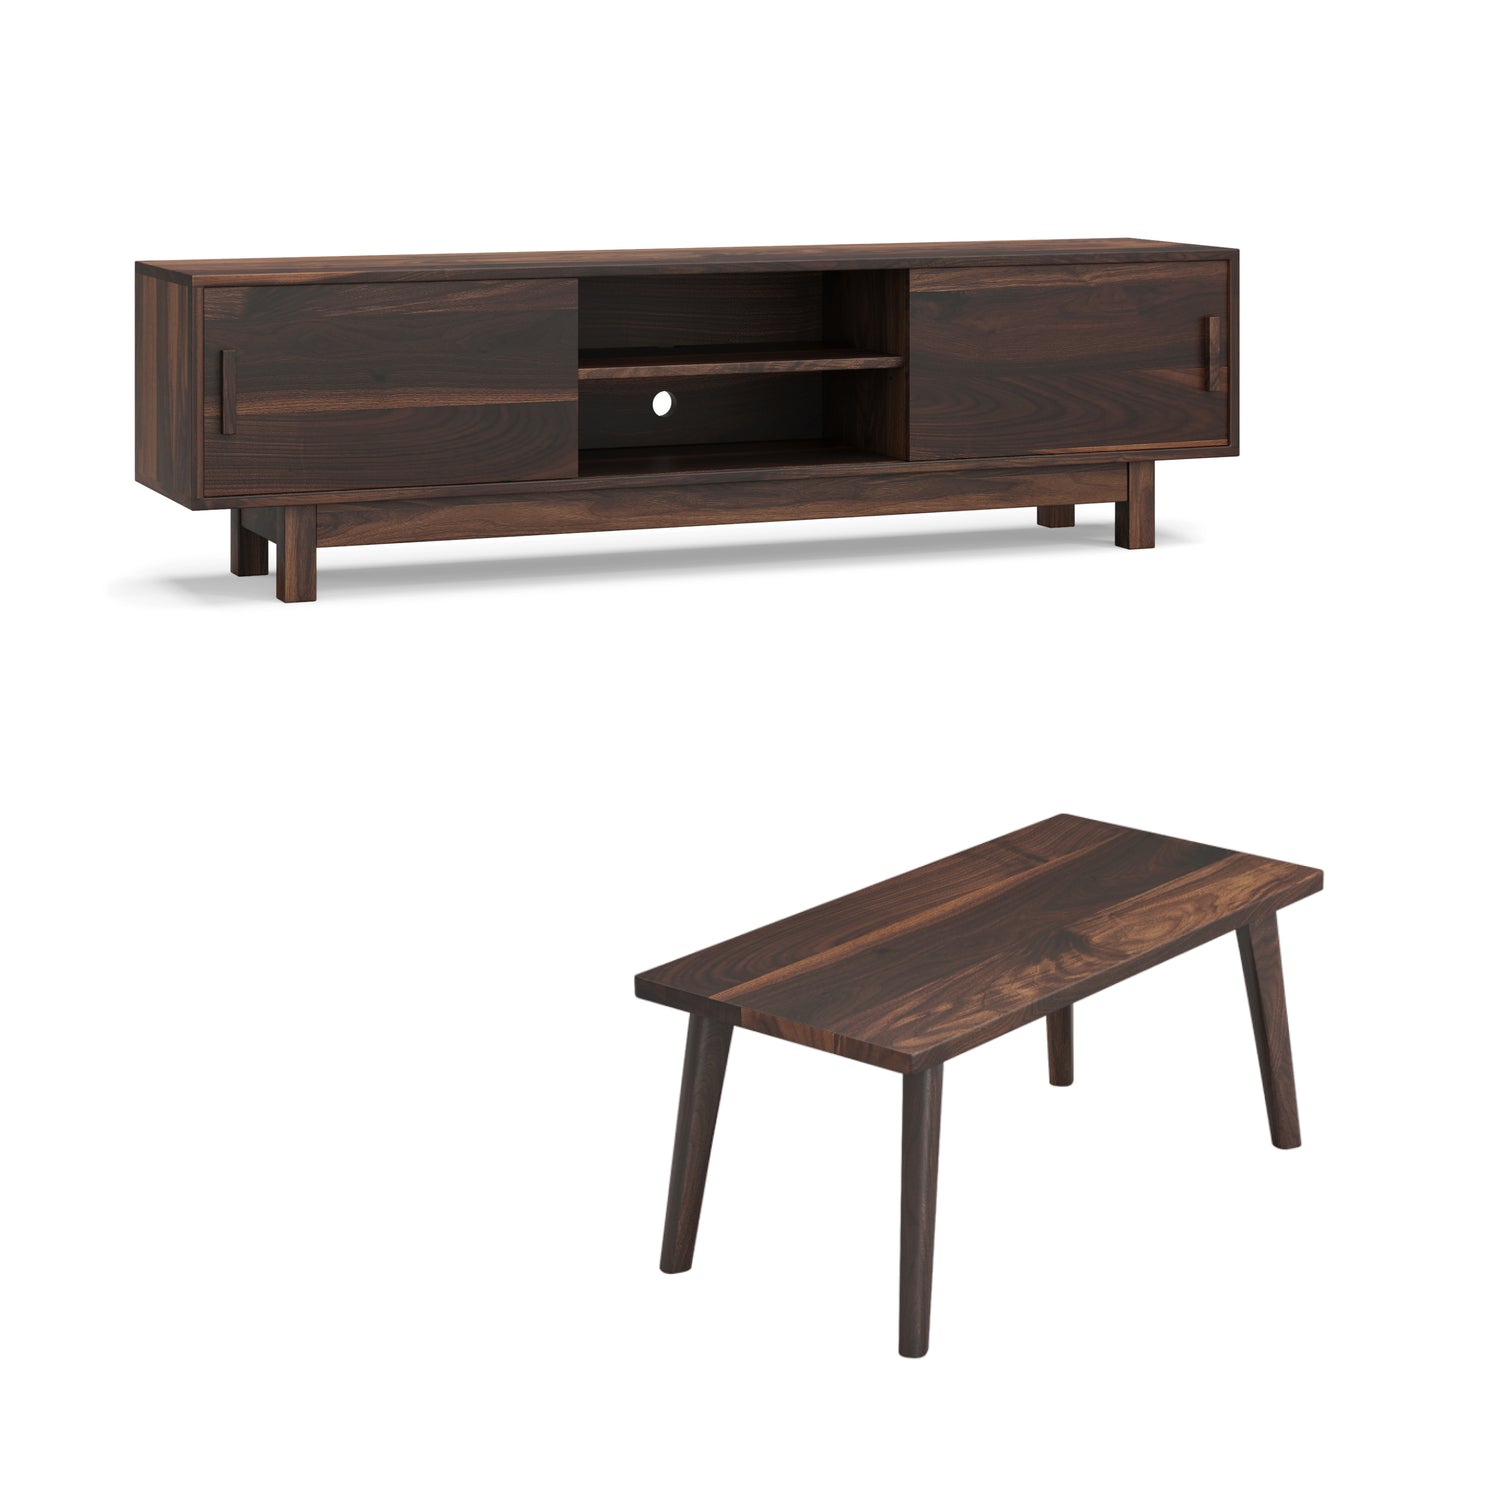 OOM TV unit and Oslo coffee table